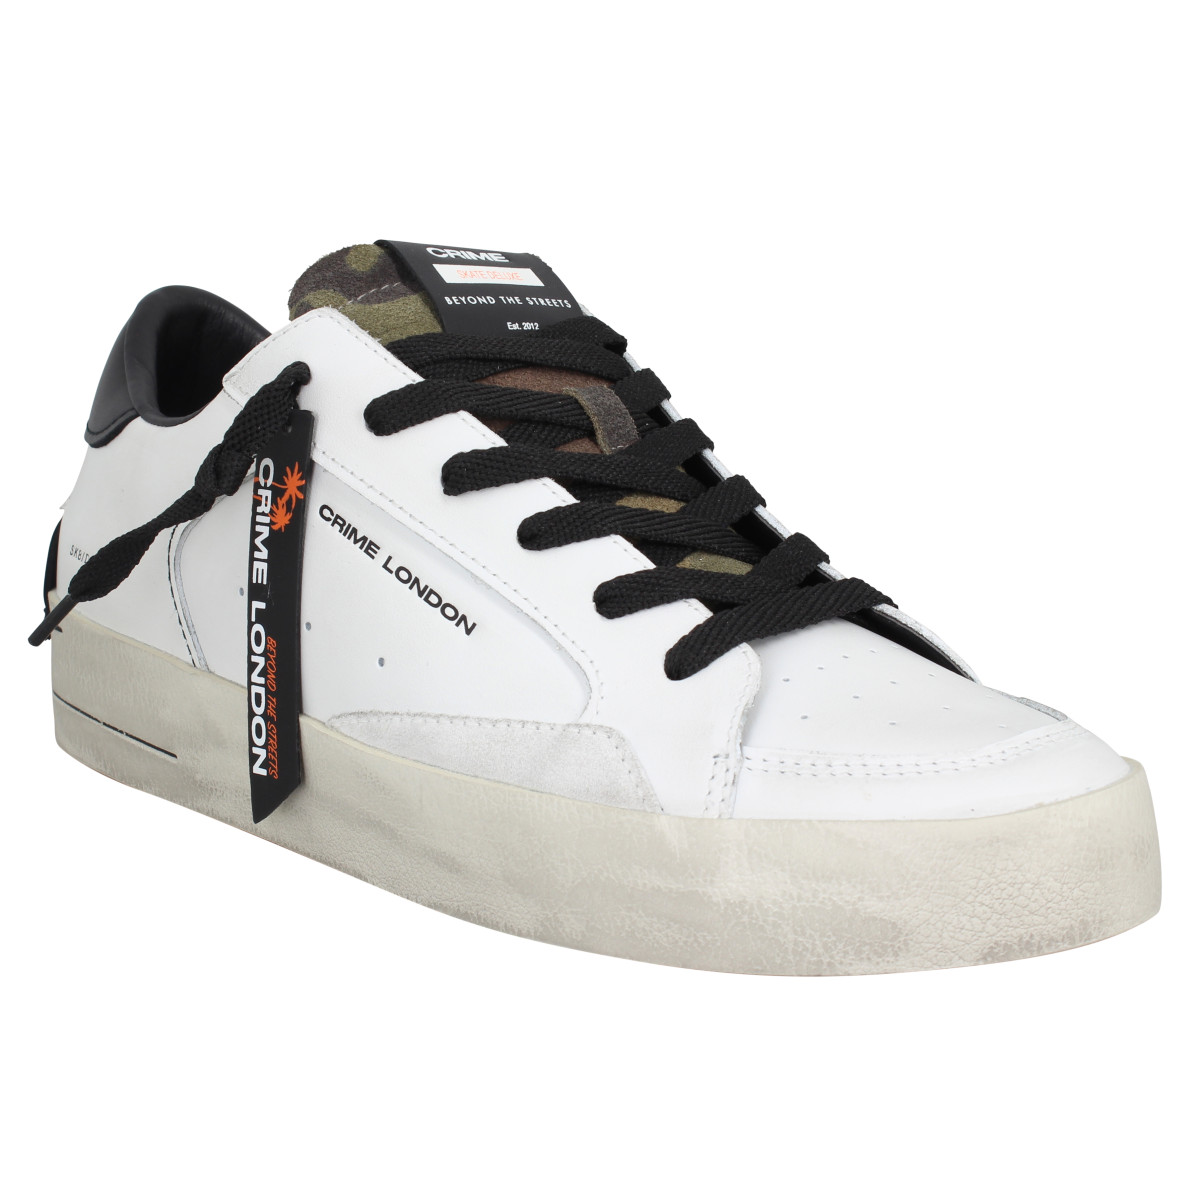 Baskets CRIME LONDON SK8 Deluxe cuir Homme Blanc